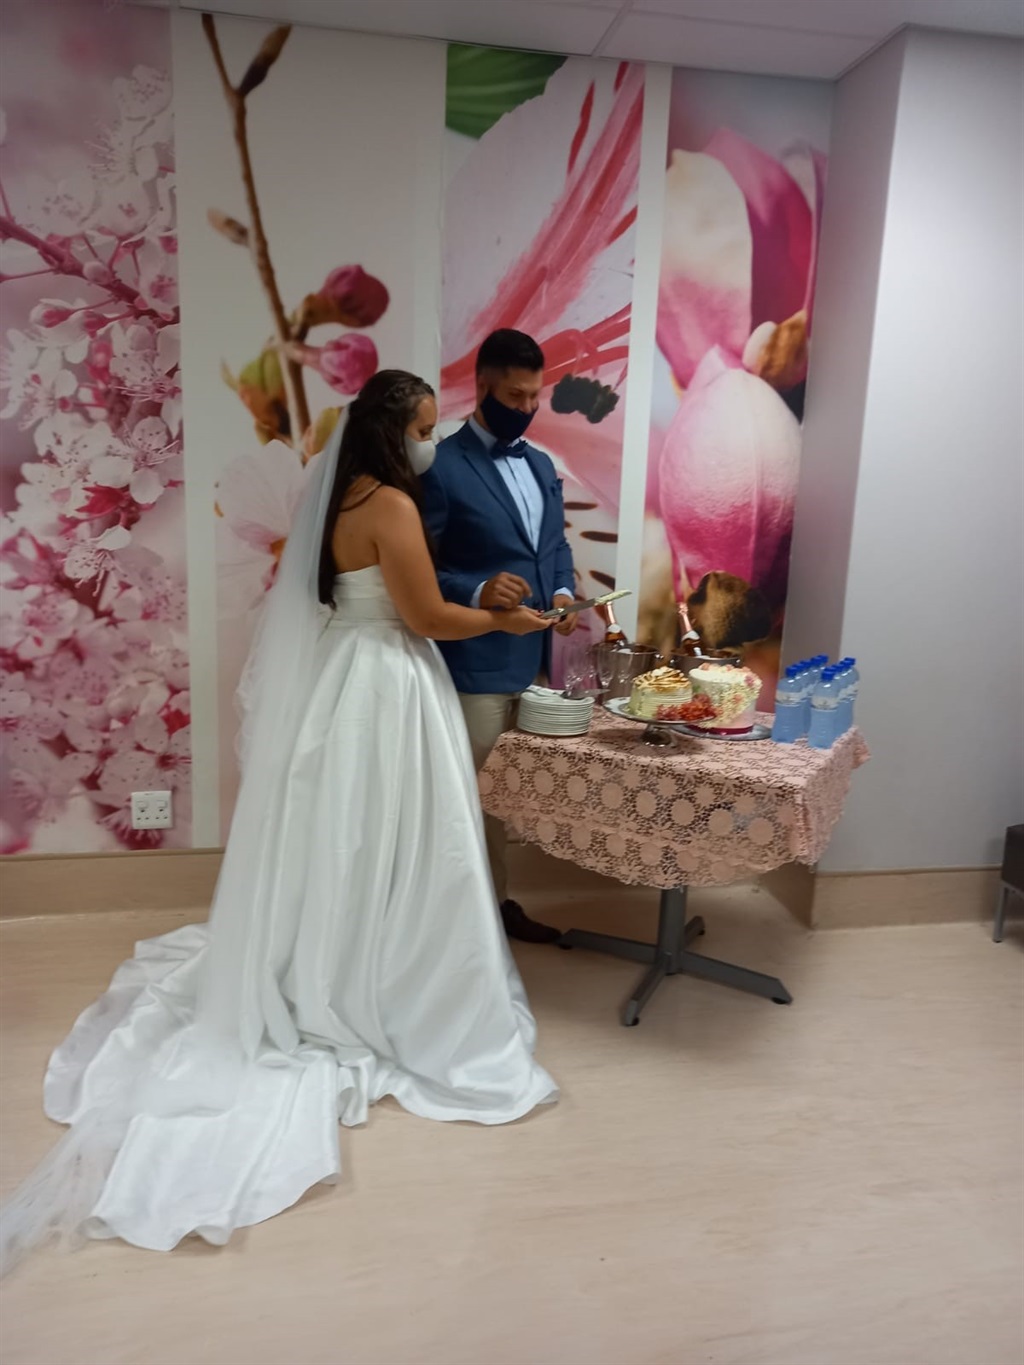 Couple exchanging vows at Melomed hospital